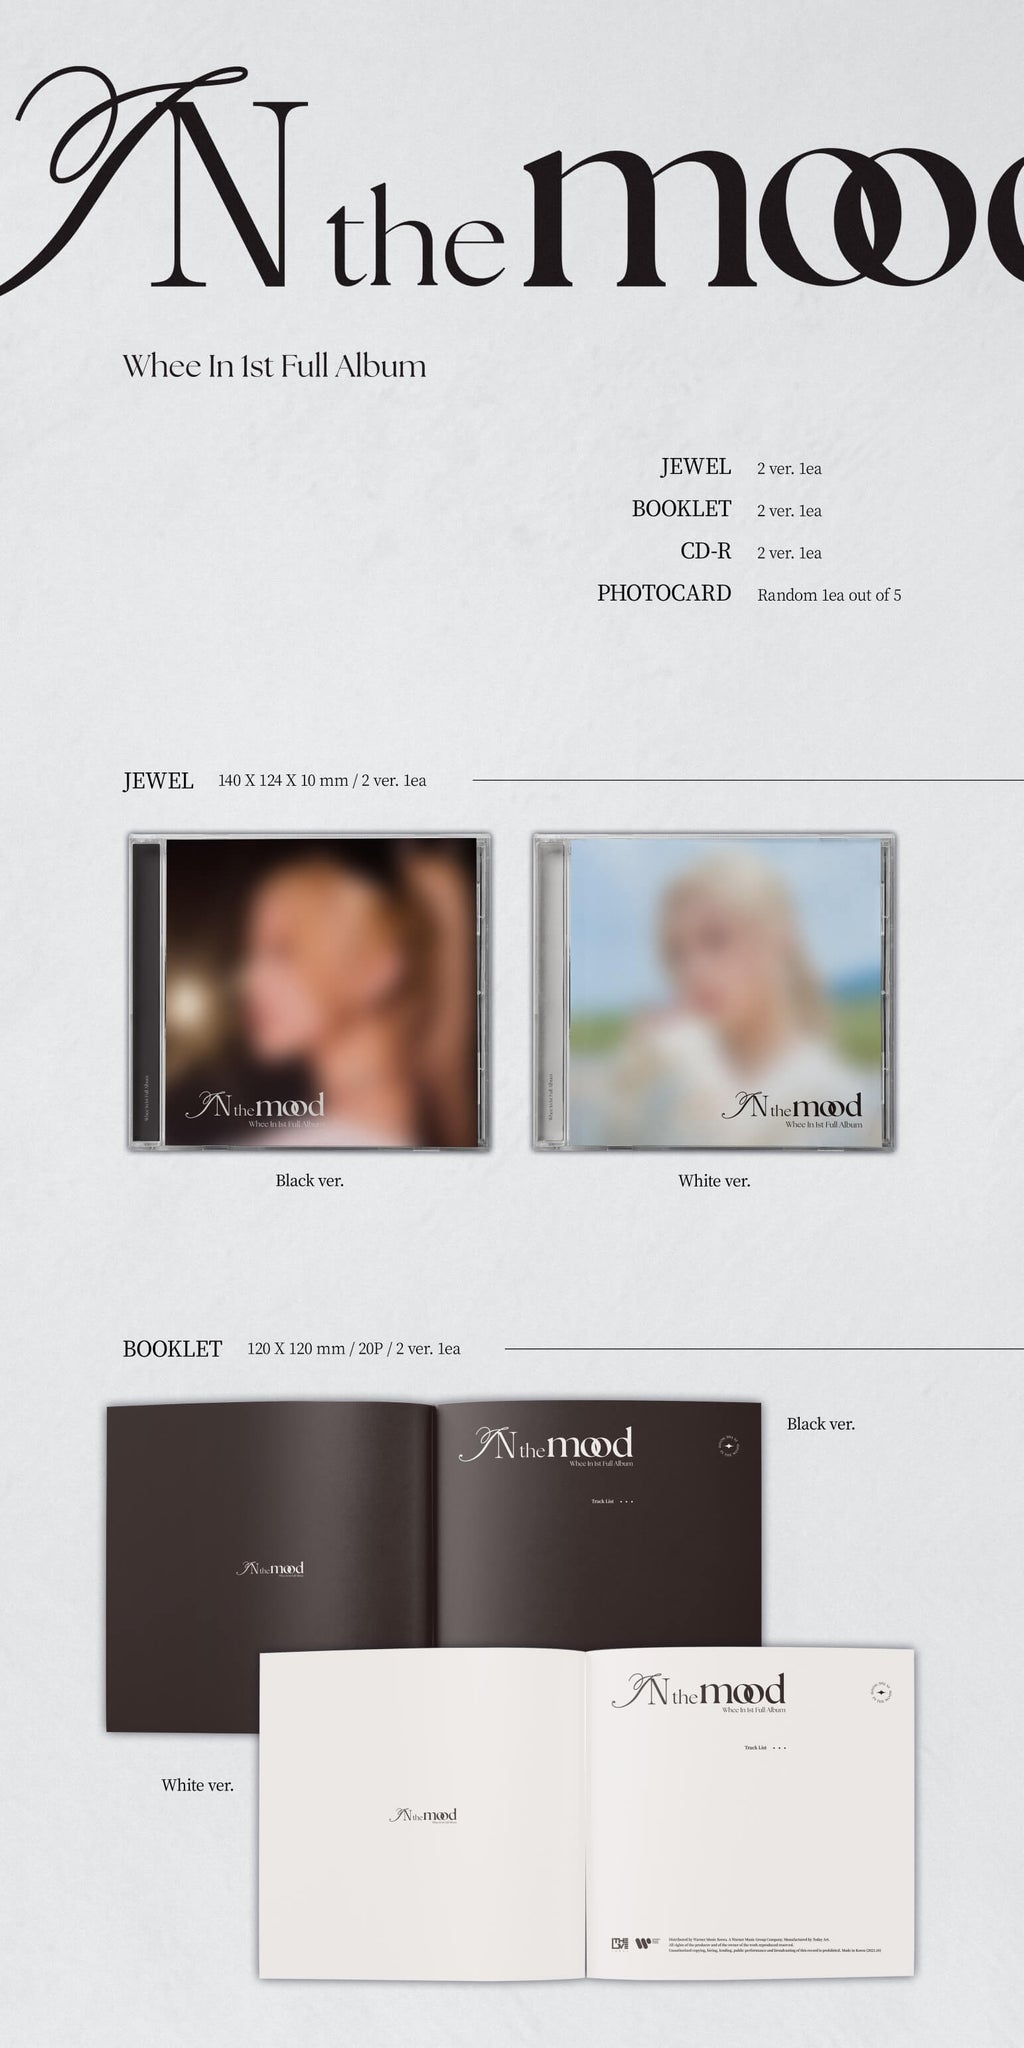 Whee In 1st Full Album IN the mood Jewel Version Inclusions Jewel Case Booklet